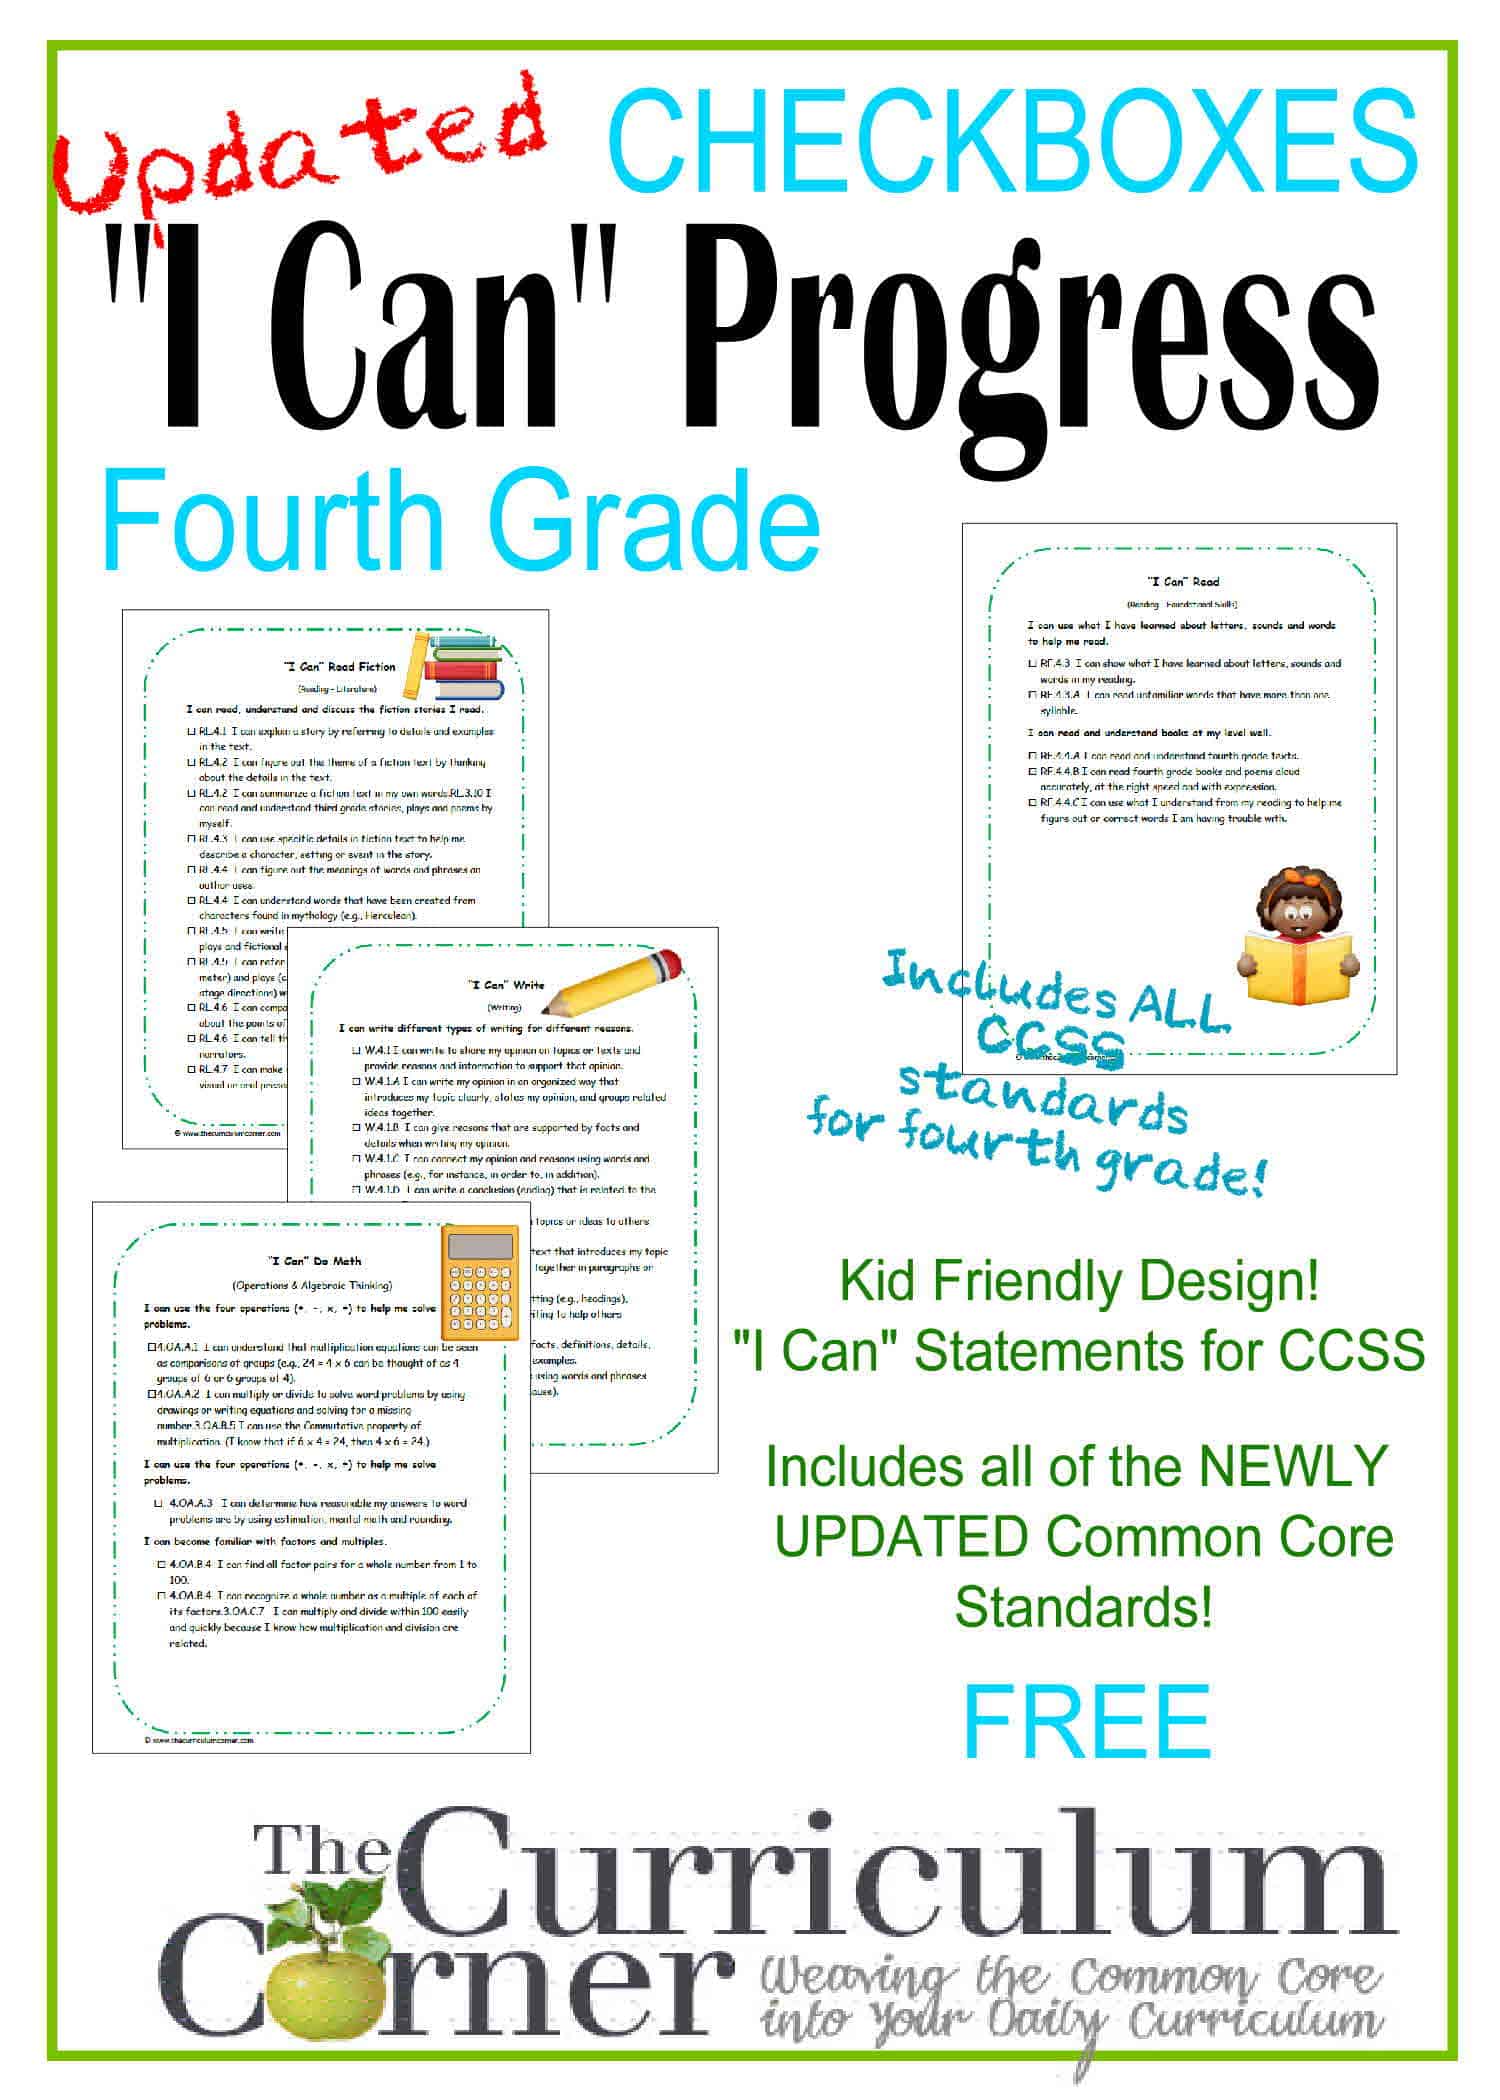 Kid Clip Art I Can Statements 4th Grade CCSS Checkboxes